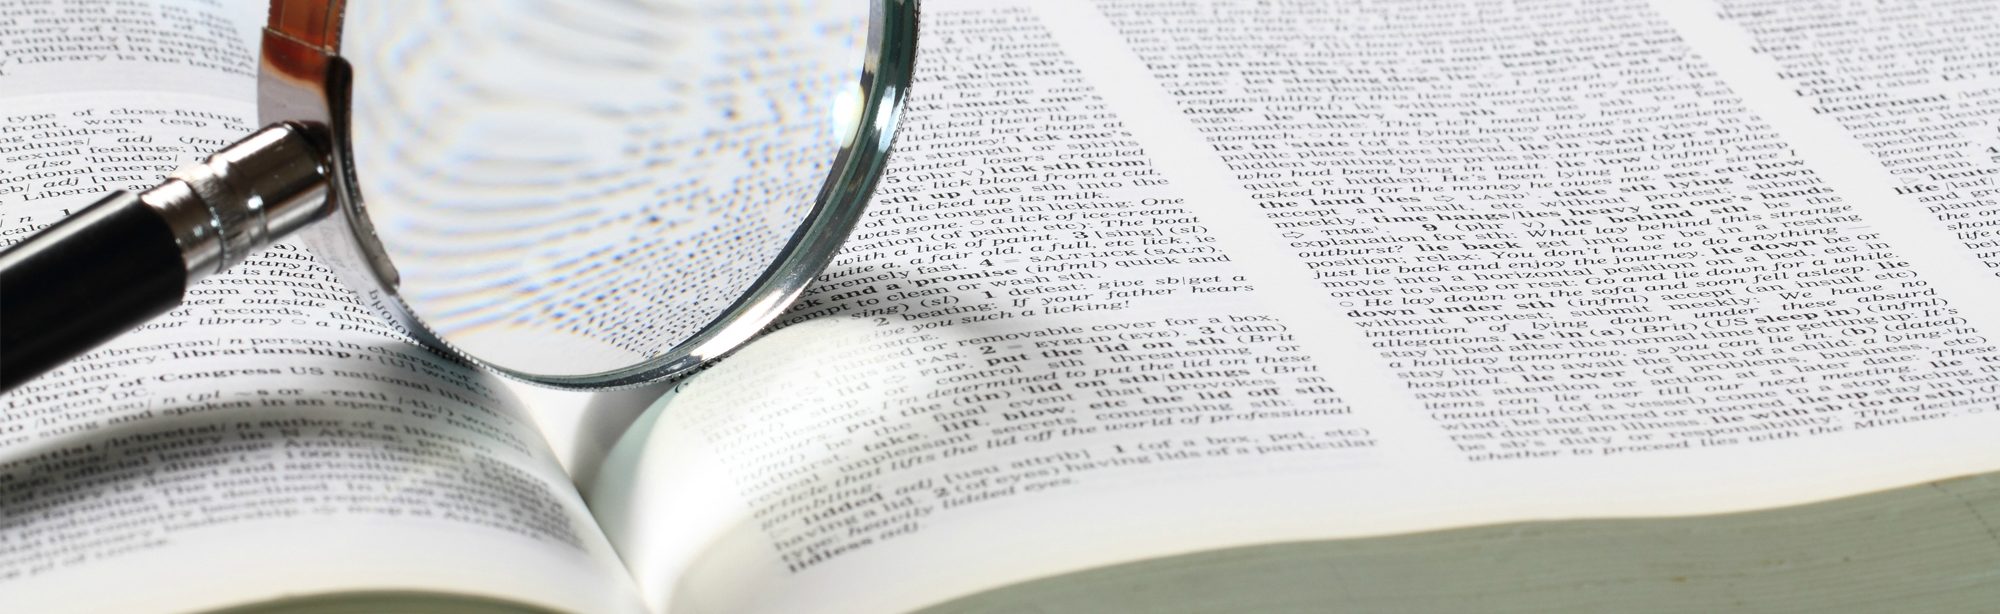 A magnifying glass balanced on an open book.